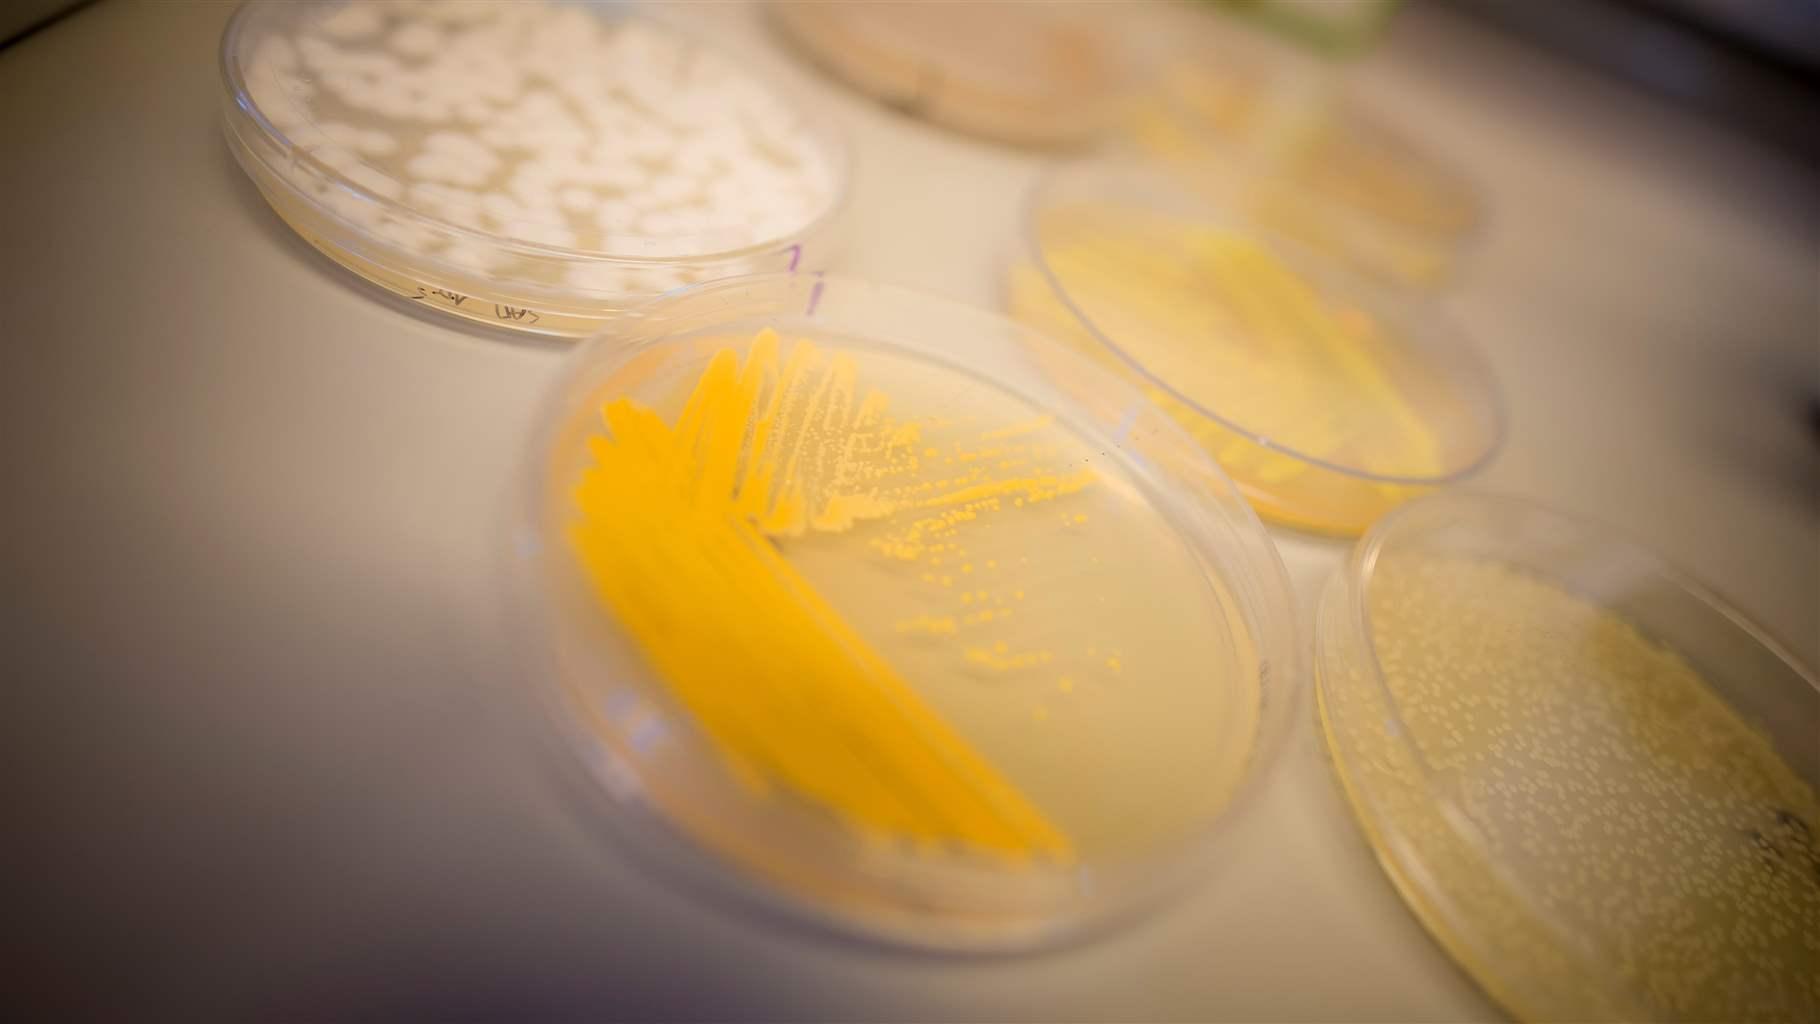 Microbial cultures